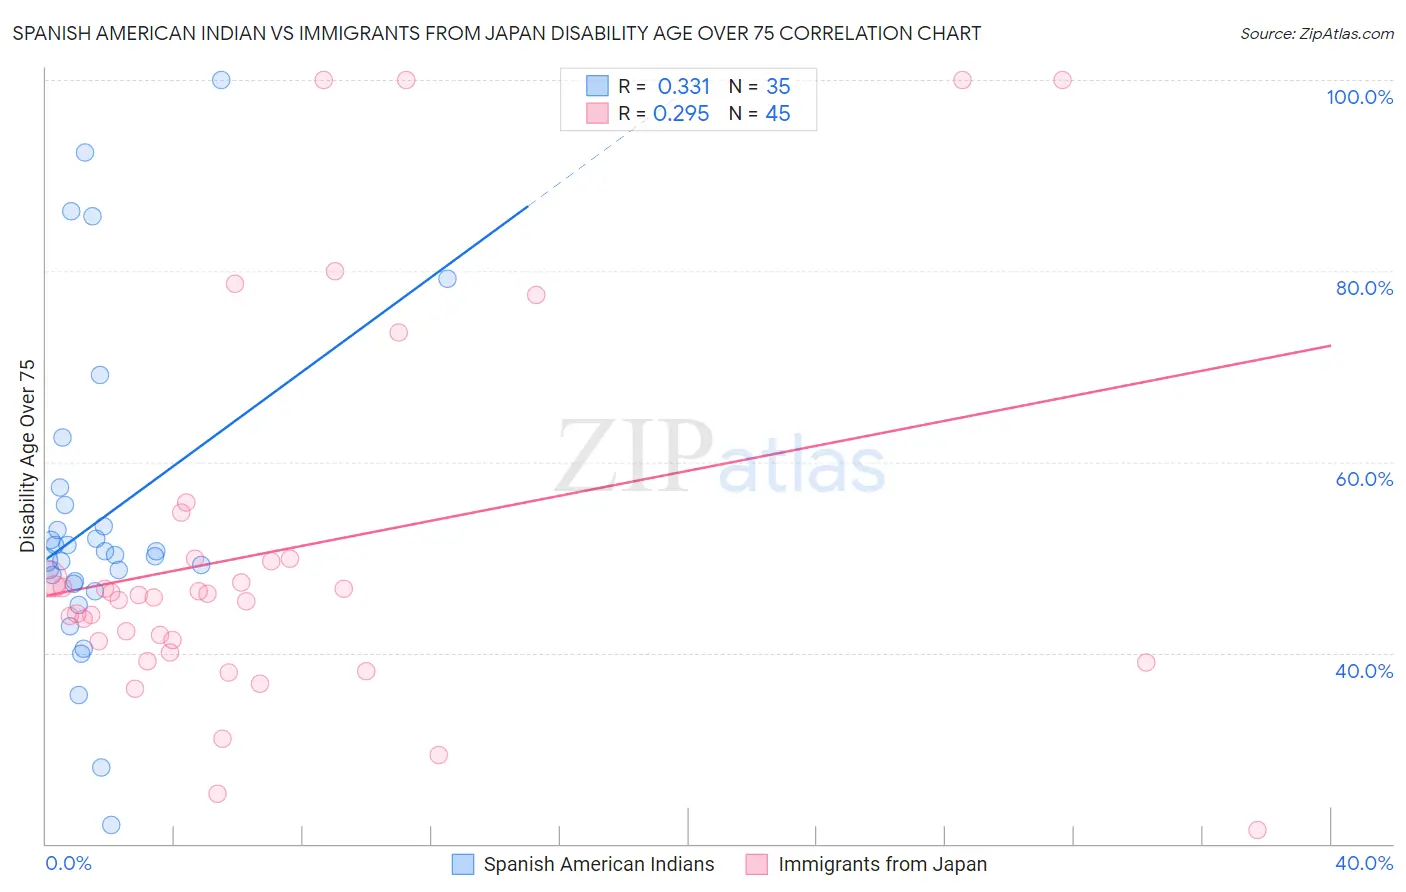 Spanish American Indian vs Immigrants from Japan Disability Age Over 75